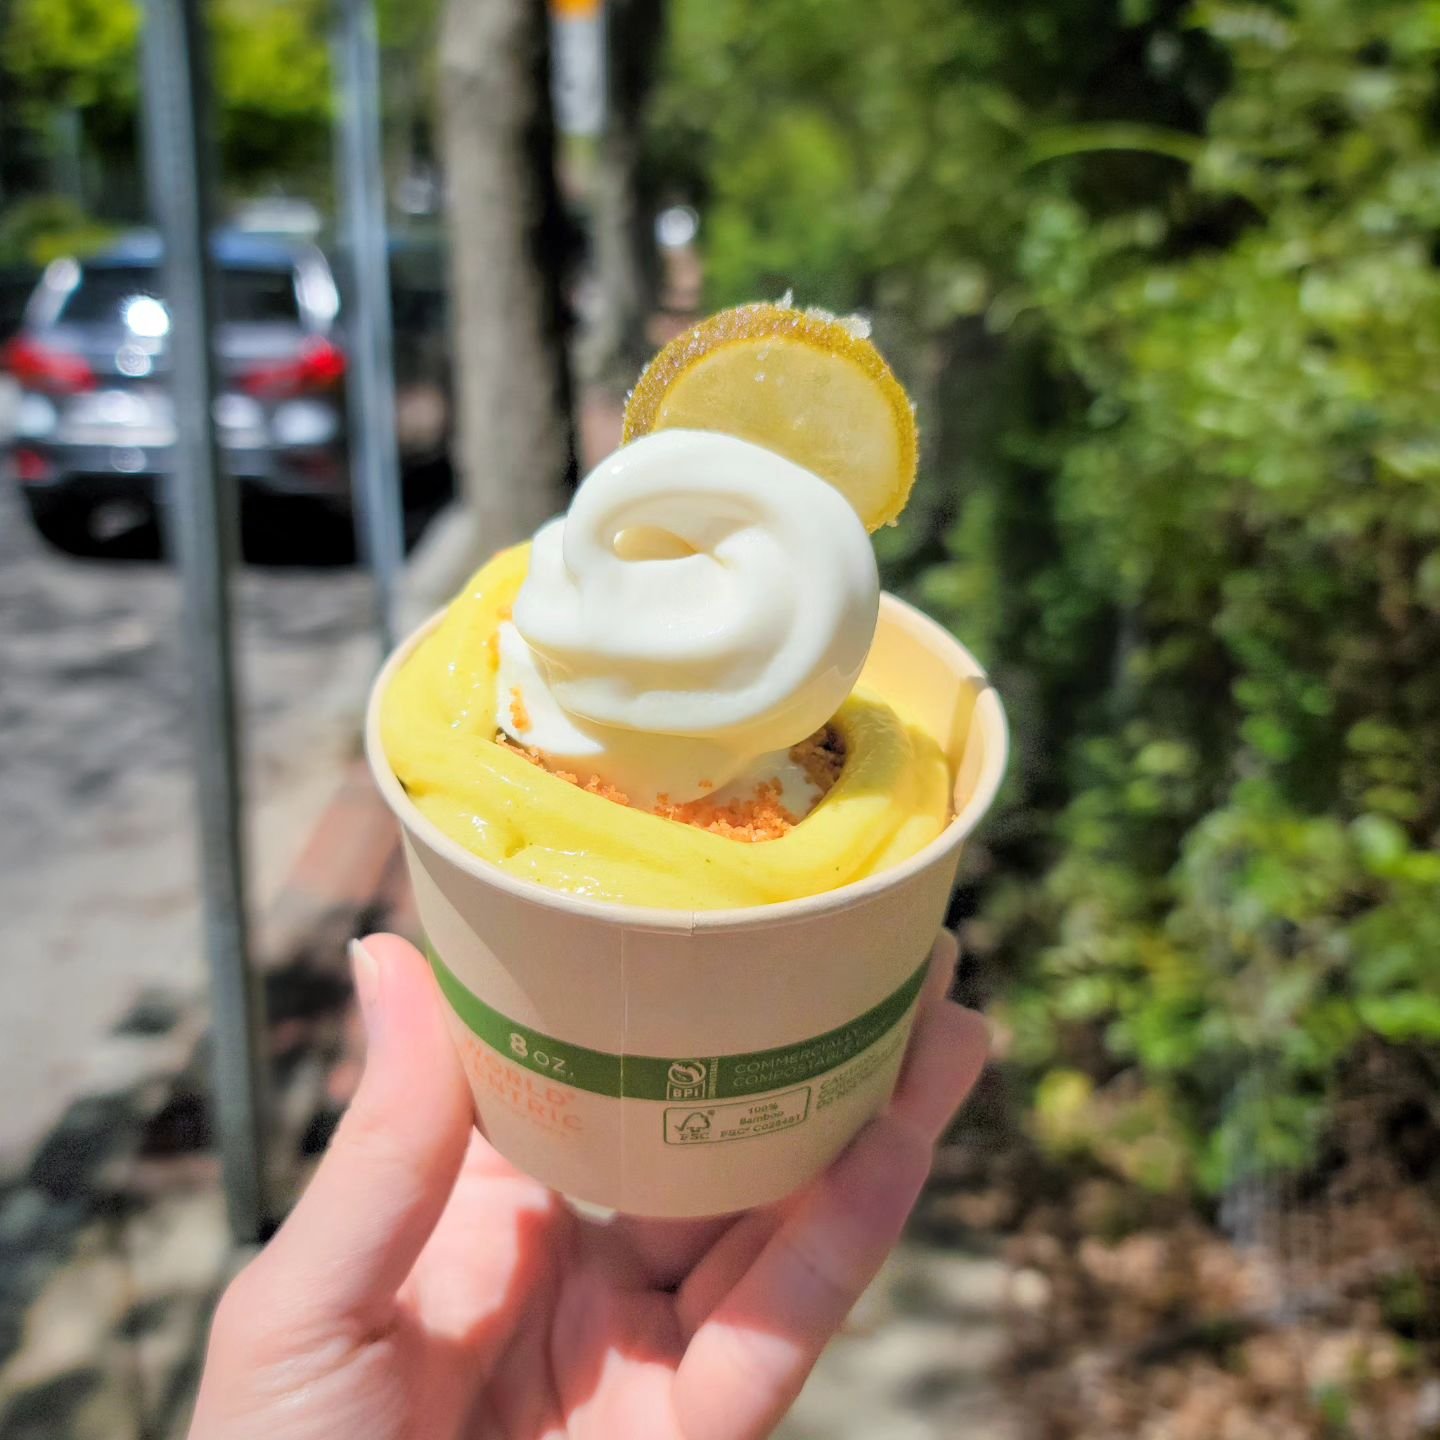 Have you tried this month's seasonal sundae?🤔

Our LIME CHEESECAKE SUNDAE is Lime+Vanilla Cheesecake soft serve topped with graham cracker crust crumble, homemade lime curd, and a candied key lime slice. Think key lime pie but in a soft serve sundae